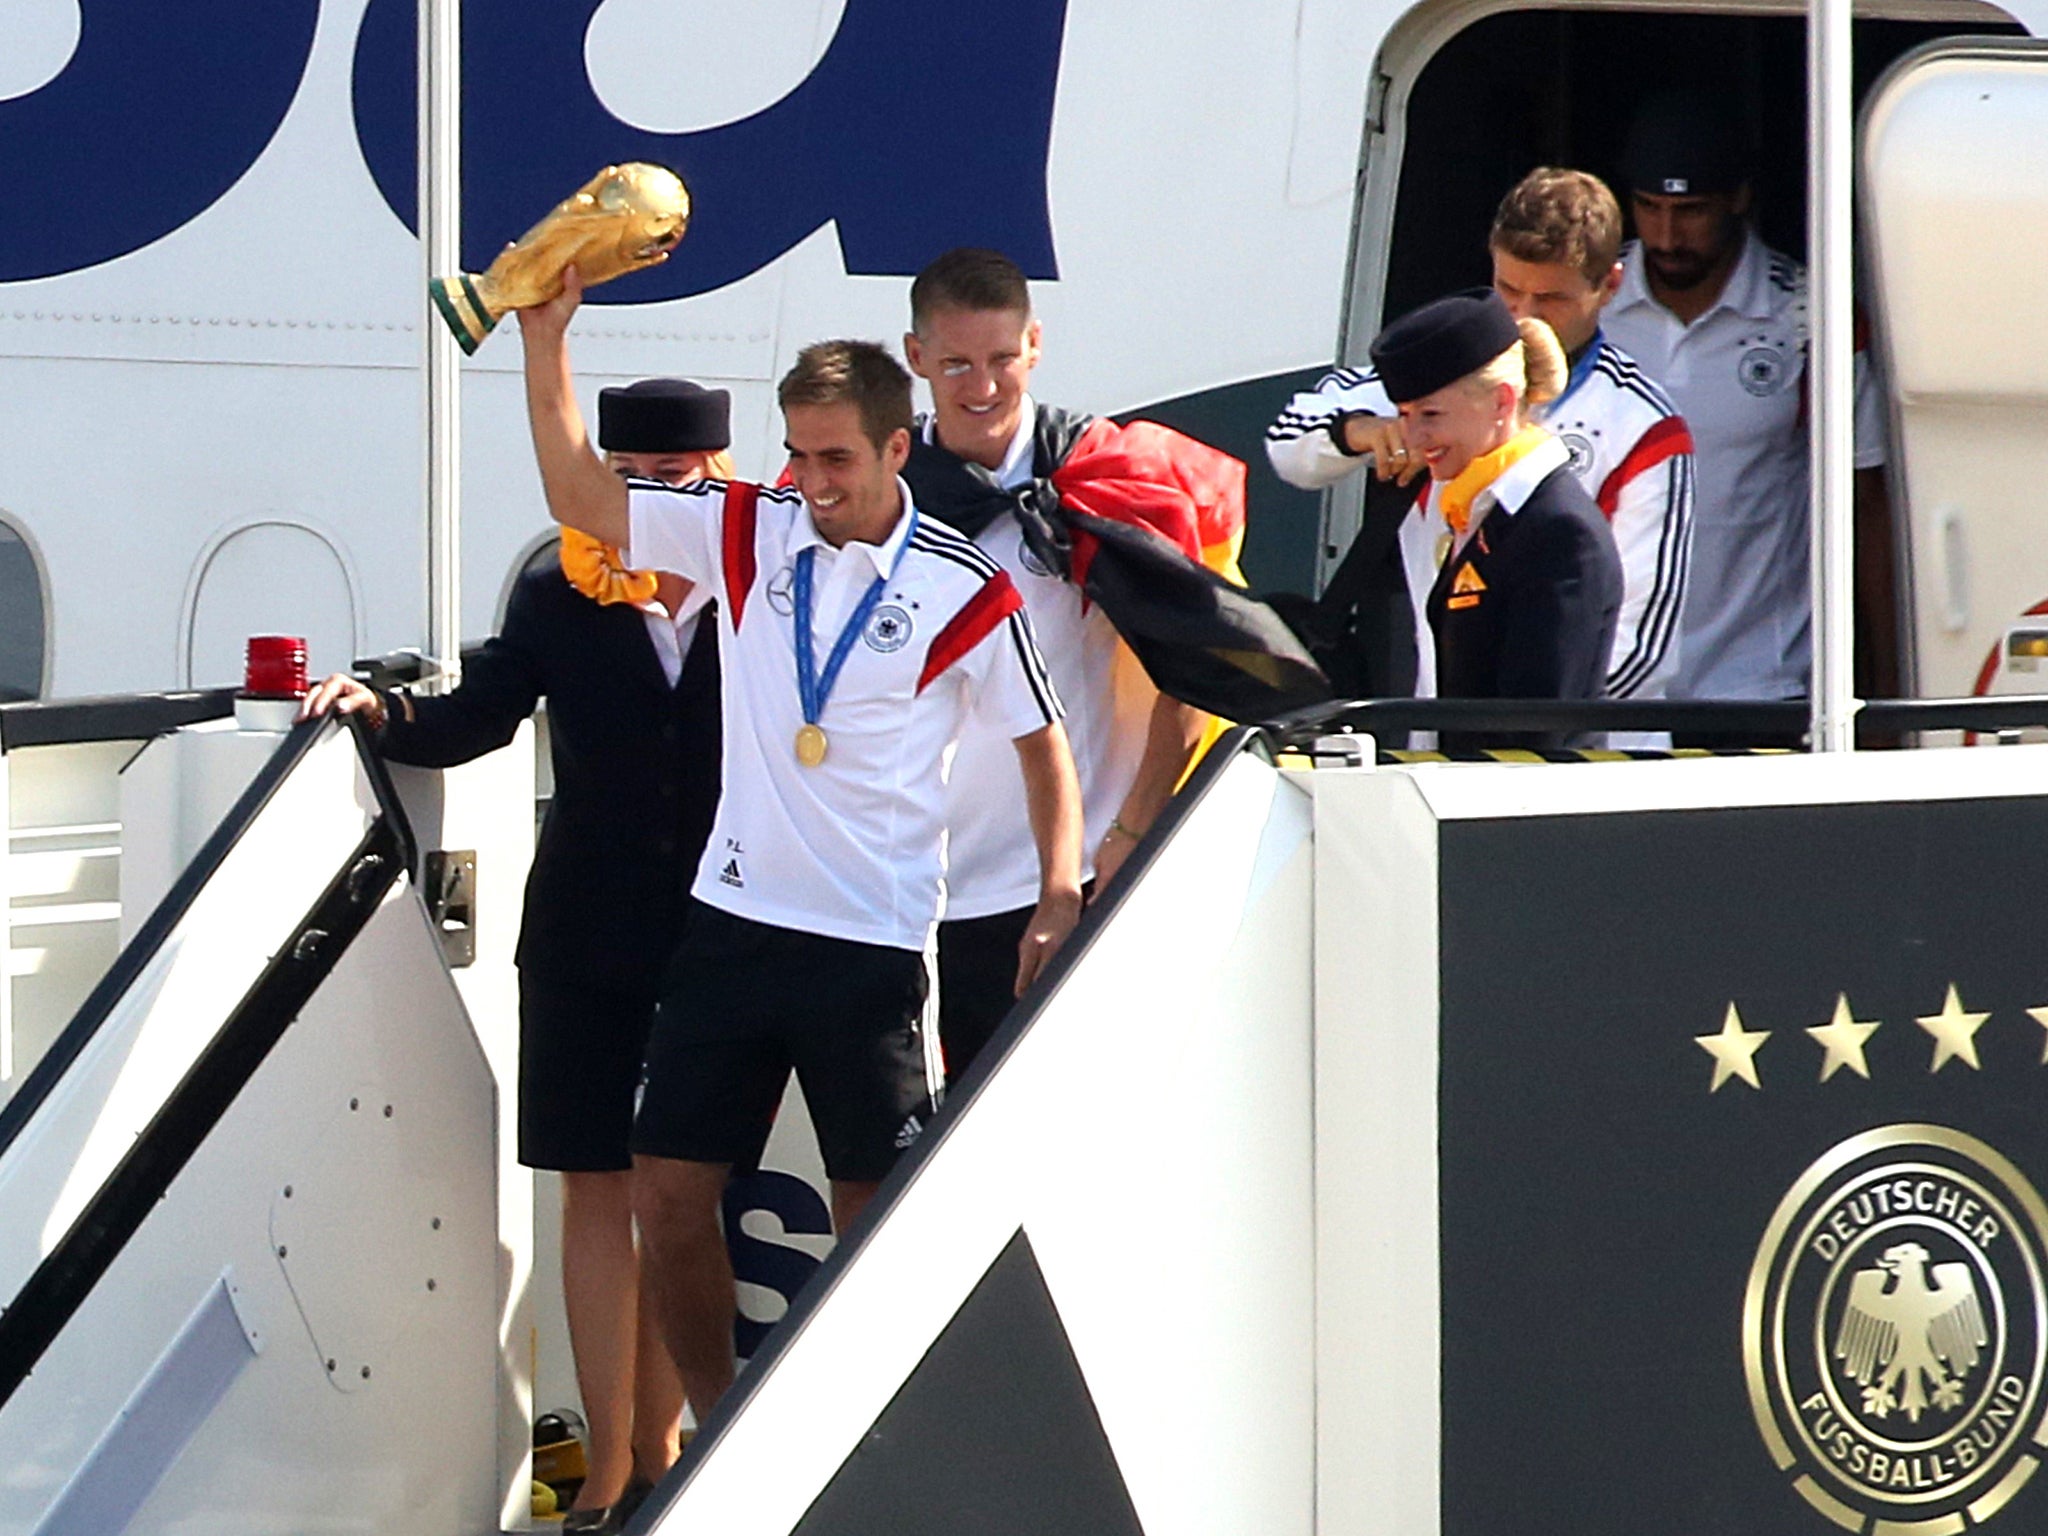 Philipp Lahm alights the plane with the World Cup